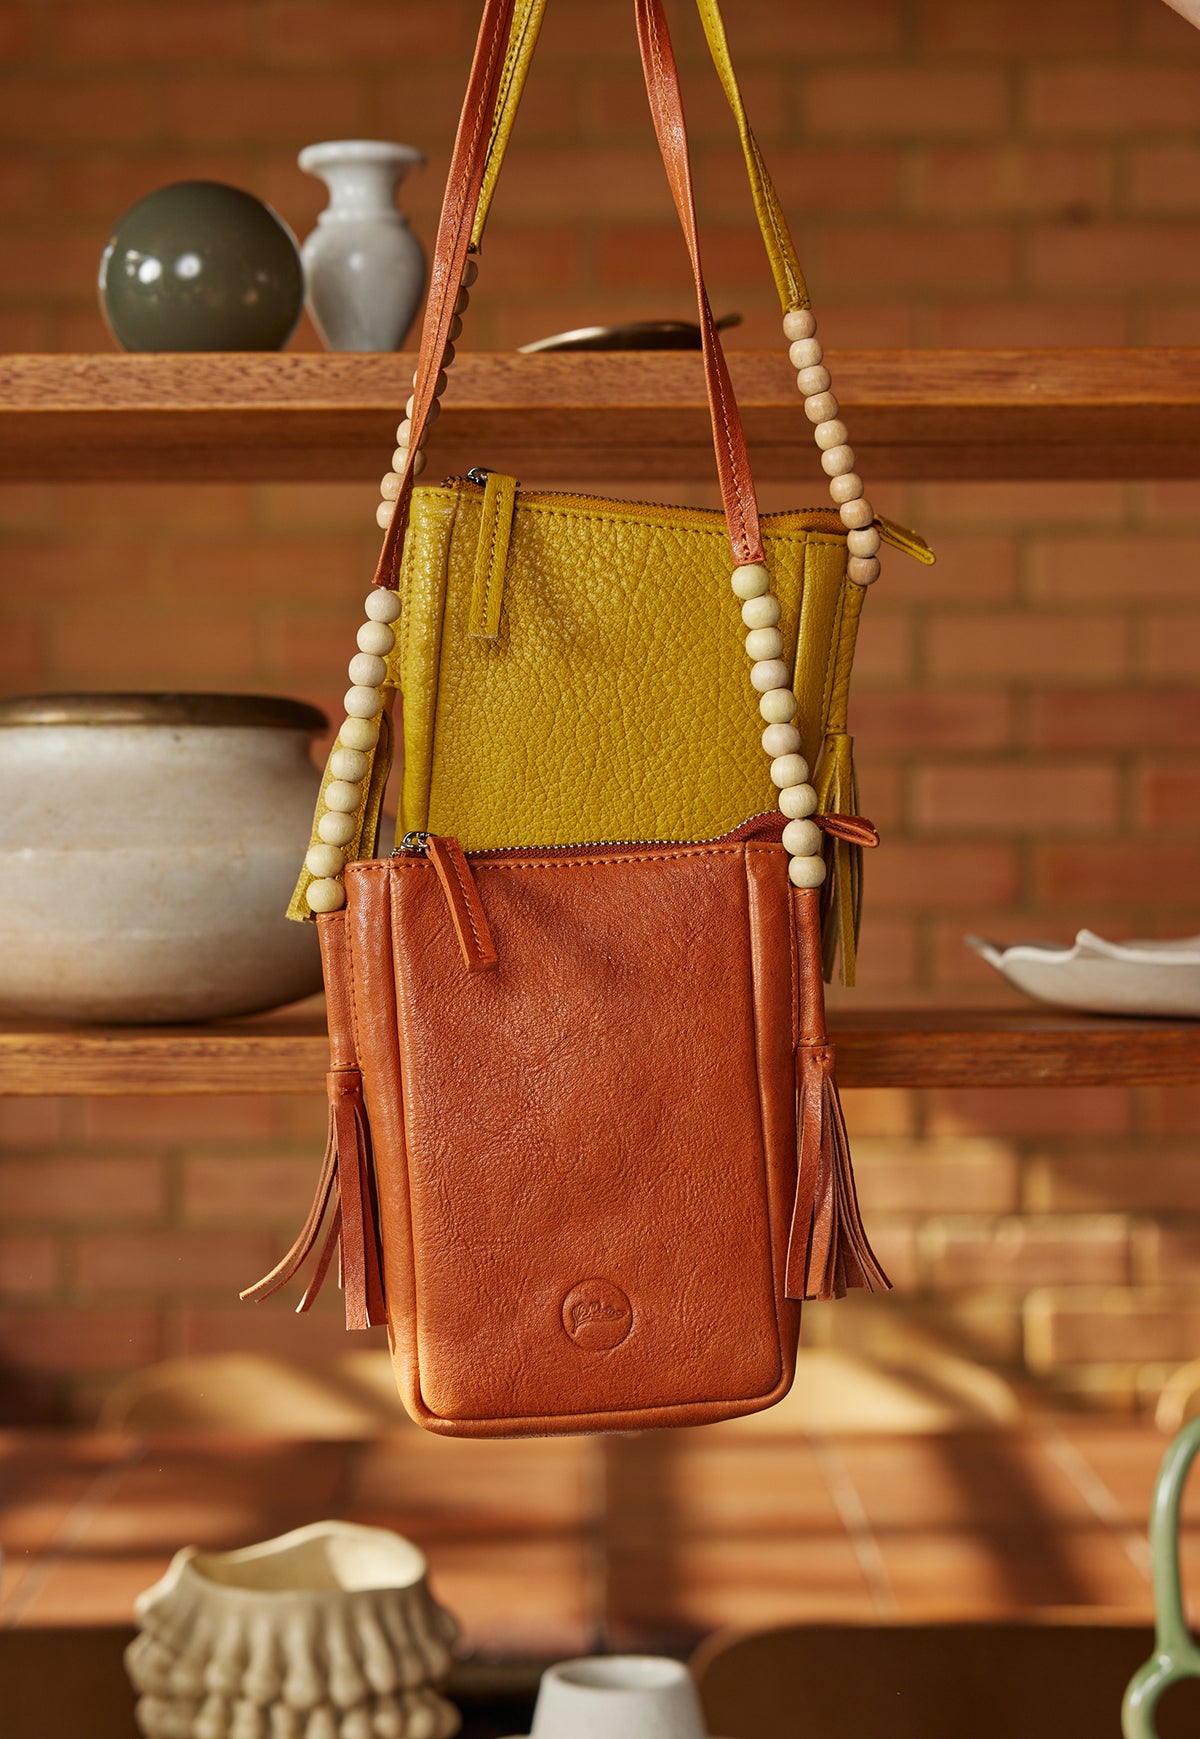 Form Pouch - Mustard